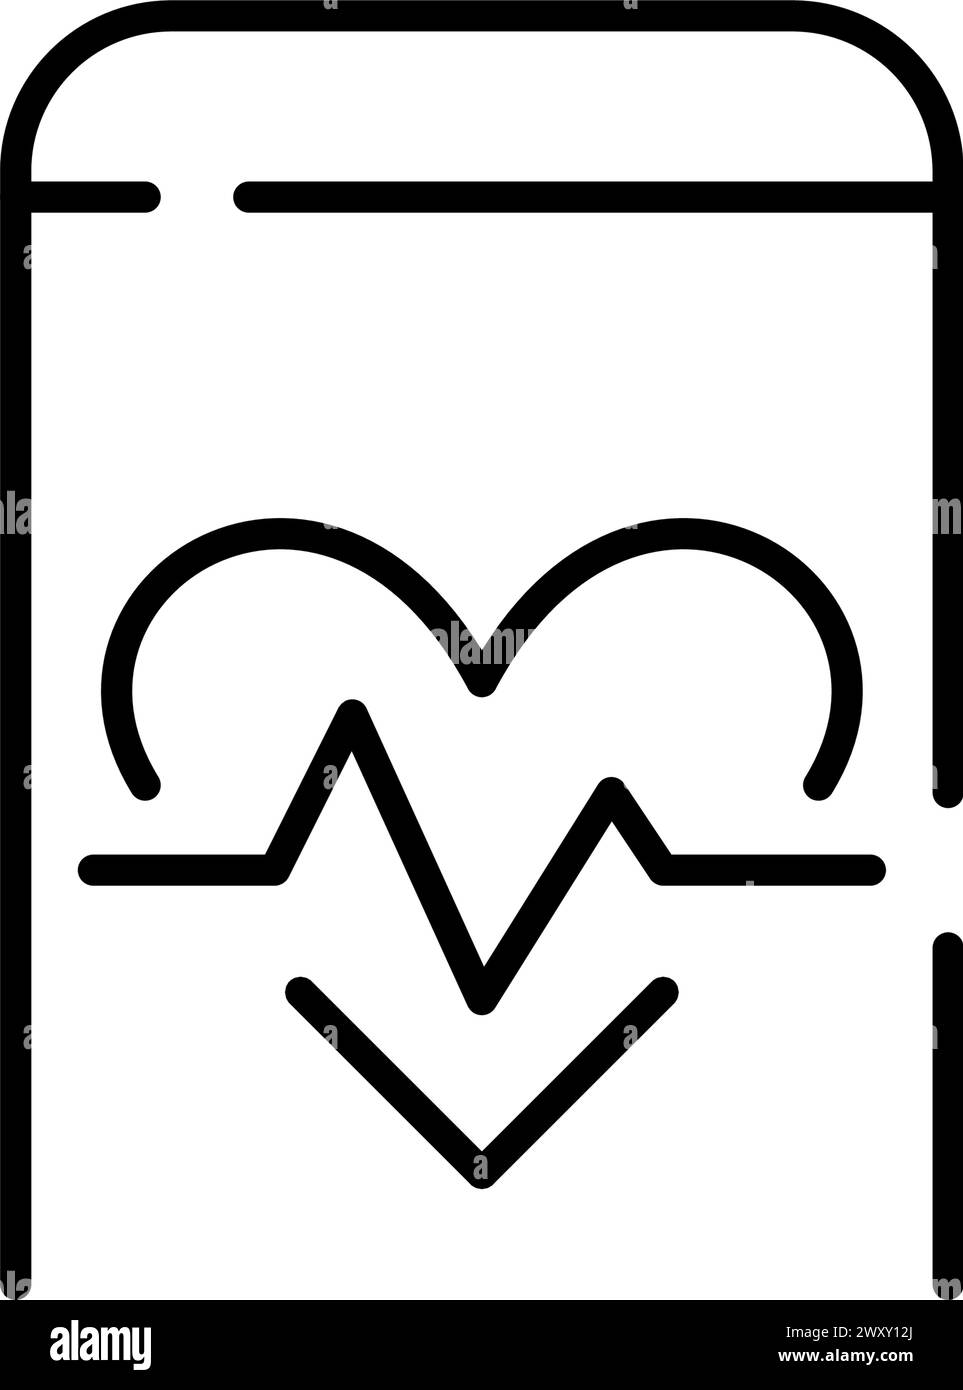 Heartbeat on smartphone icon. Real-time health data and monitoring using mobile app. Pixel perfect vector icon Stock Vector